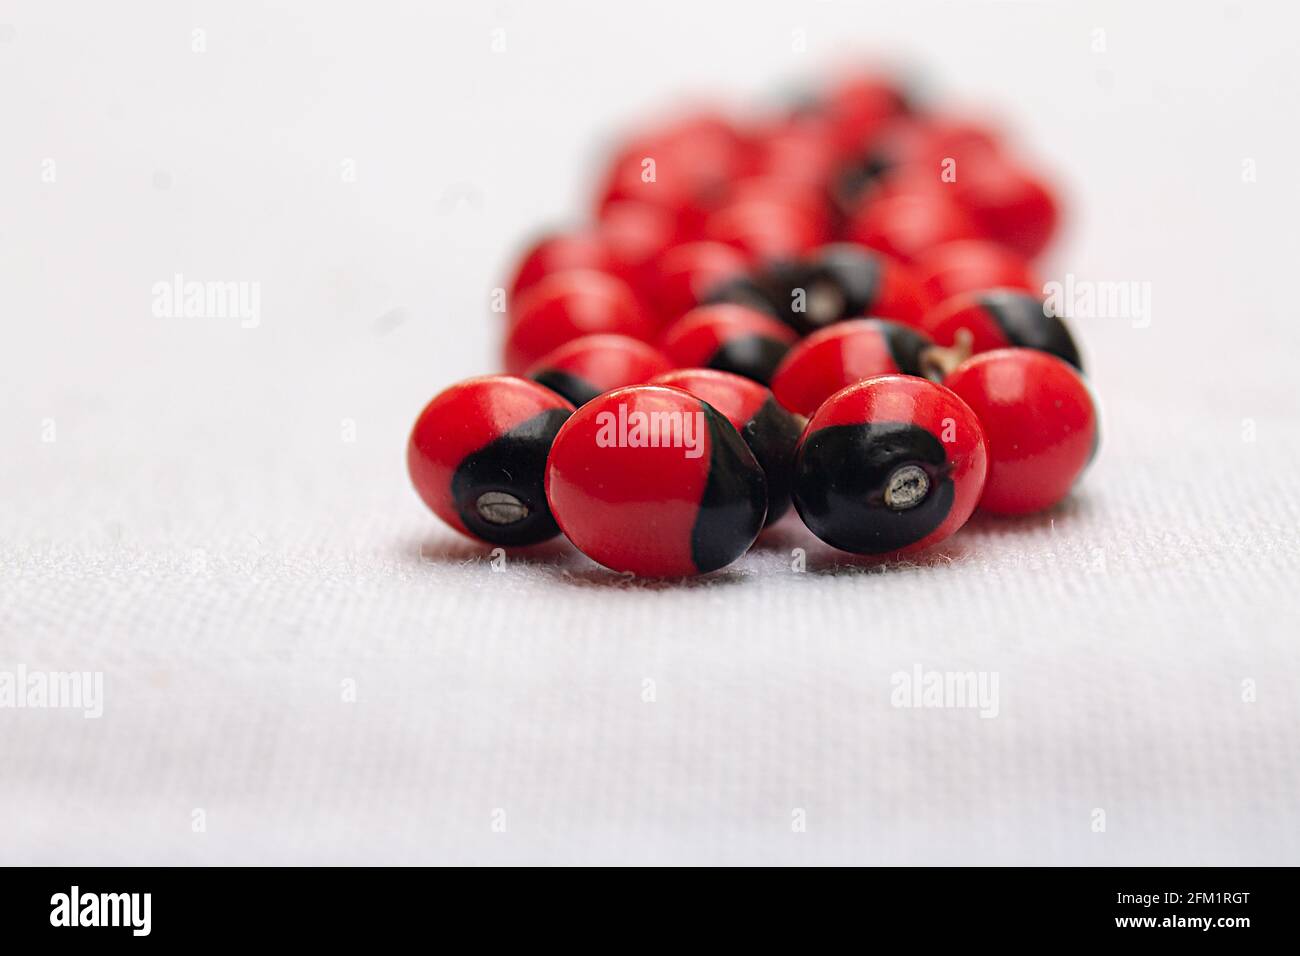 Selective focus shot of a group of vibrant red and black abrus precatorius peas on a white table Stock Photo